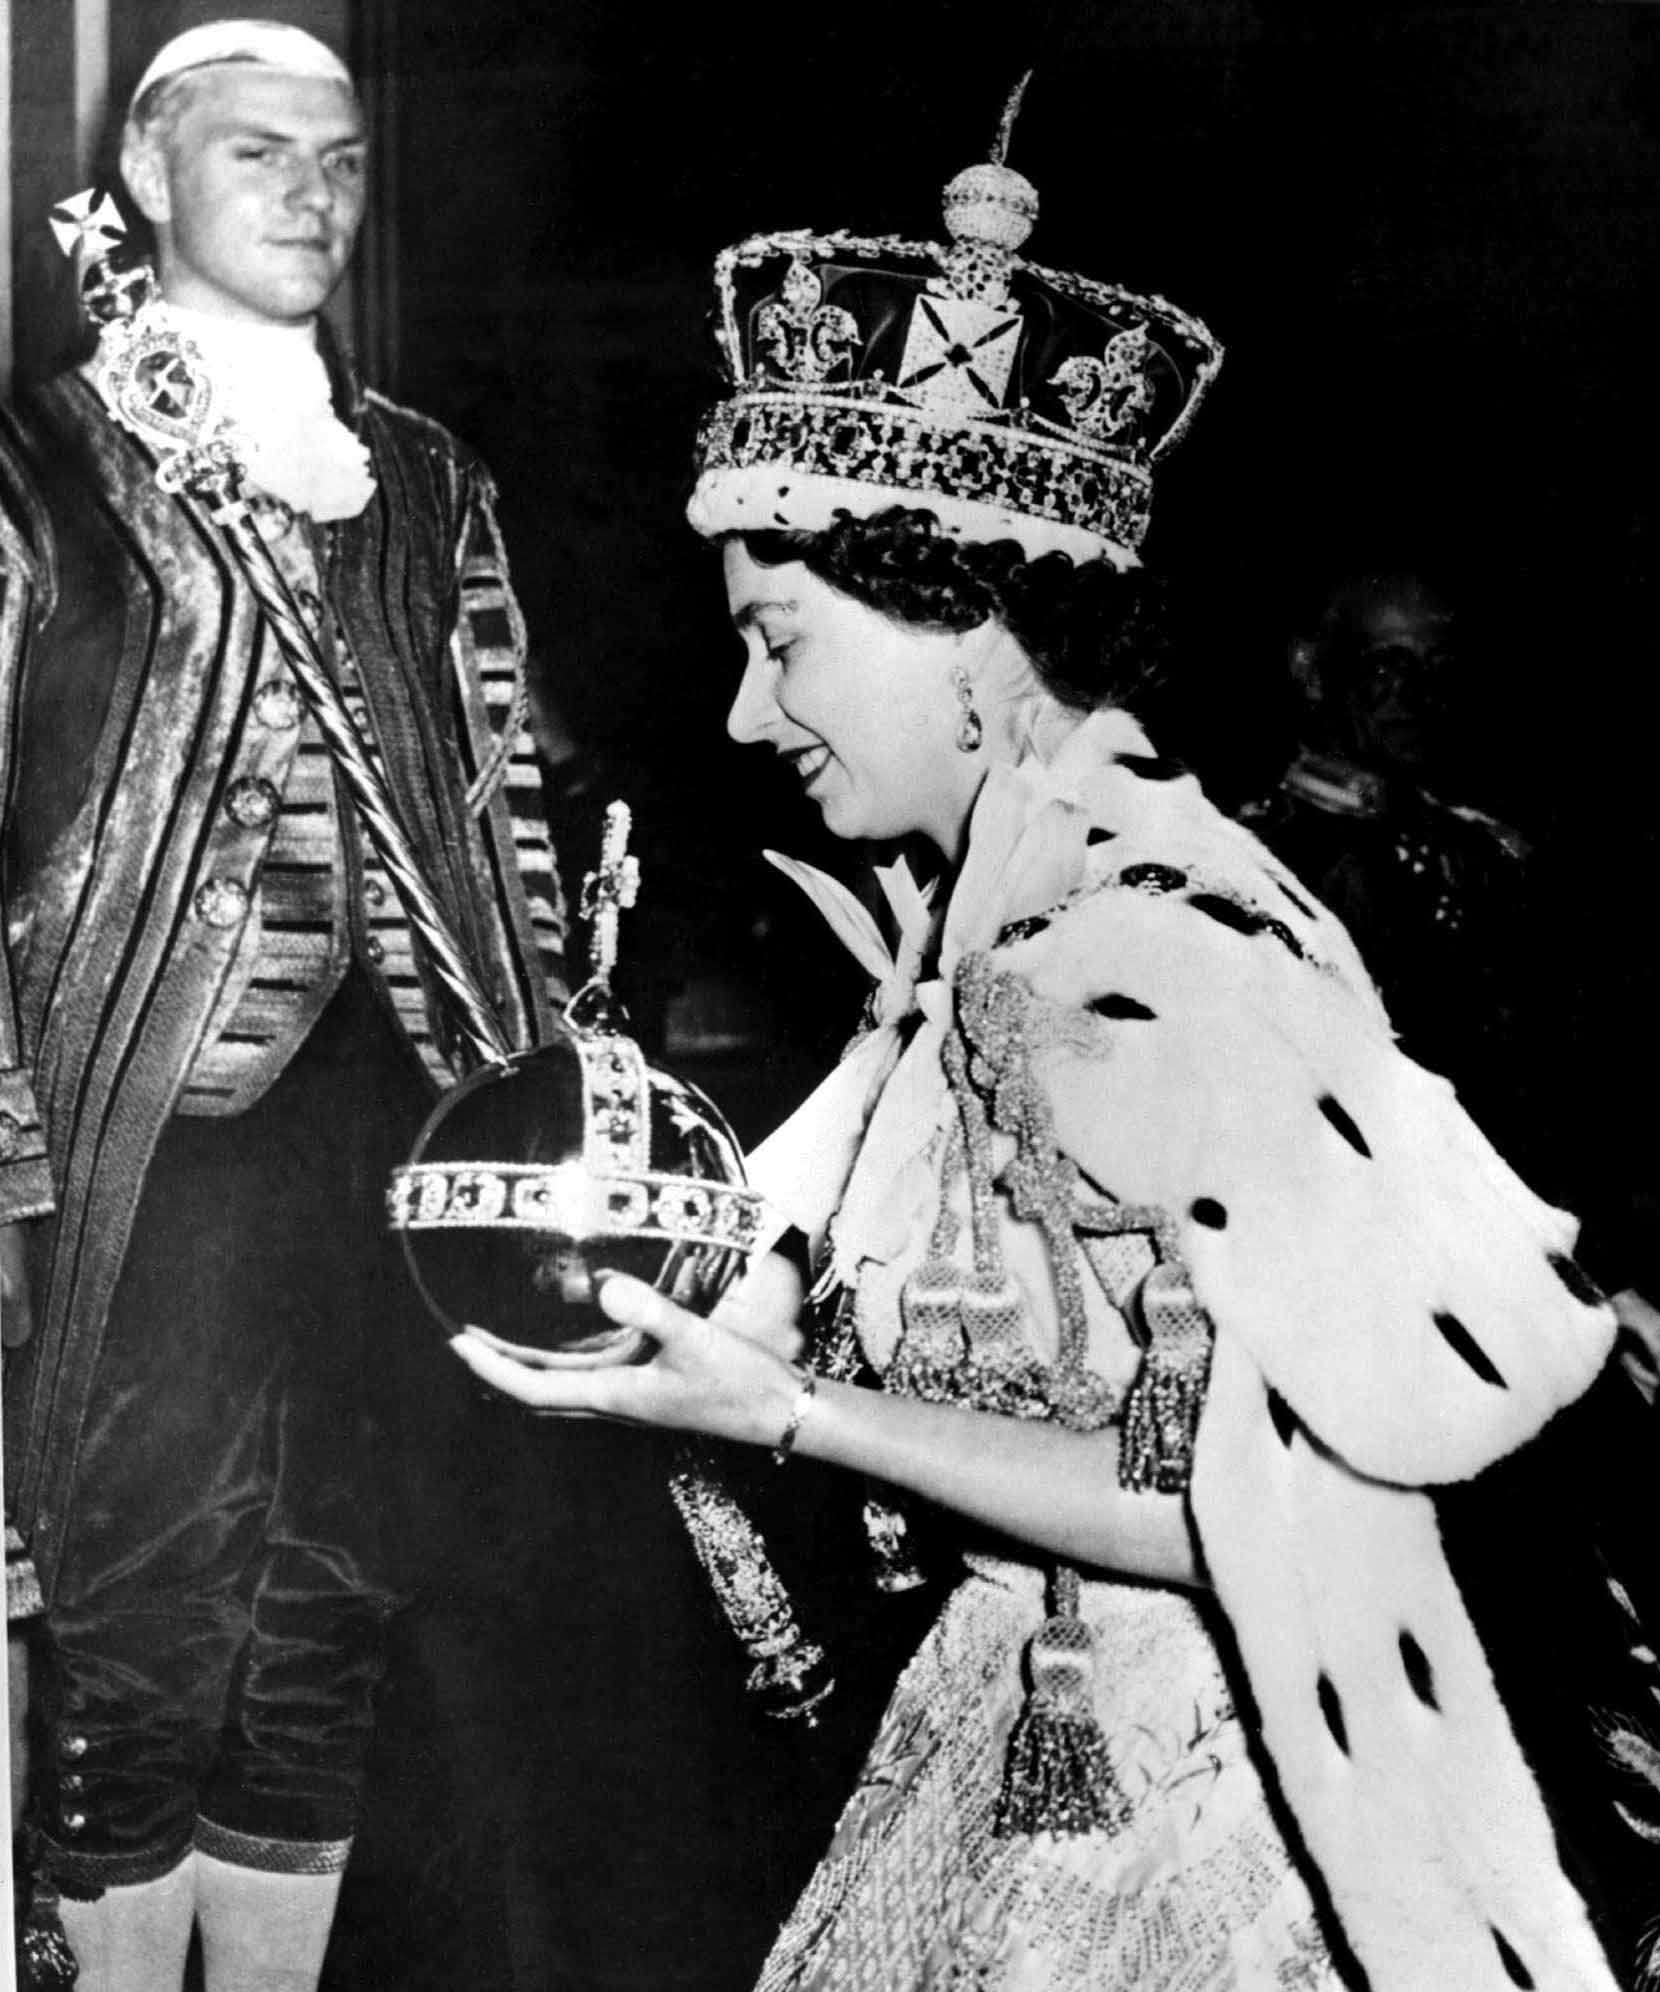 LA REINA ISABEL II CON LA CRUZ Y EL ORBE DURANTE LA CEREMONIA DE SU CORONACION COMO REINA DE INGLATERRA AP Photo / © RADIALPRESS 02/06/1935 LONDRES *** Local Caption *** In a traditional ceremony, Britain crowned a new Queen, Elizabeth II wore the bejeweled Imperial Crown and carried the Orb, in left hand, and Scepter with Cross as she left Westminster Abbey on June 2, 1953, at the end of the Coronation Ceremony.